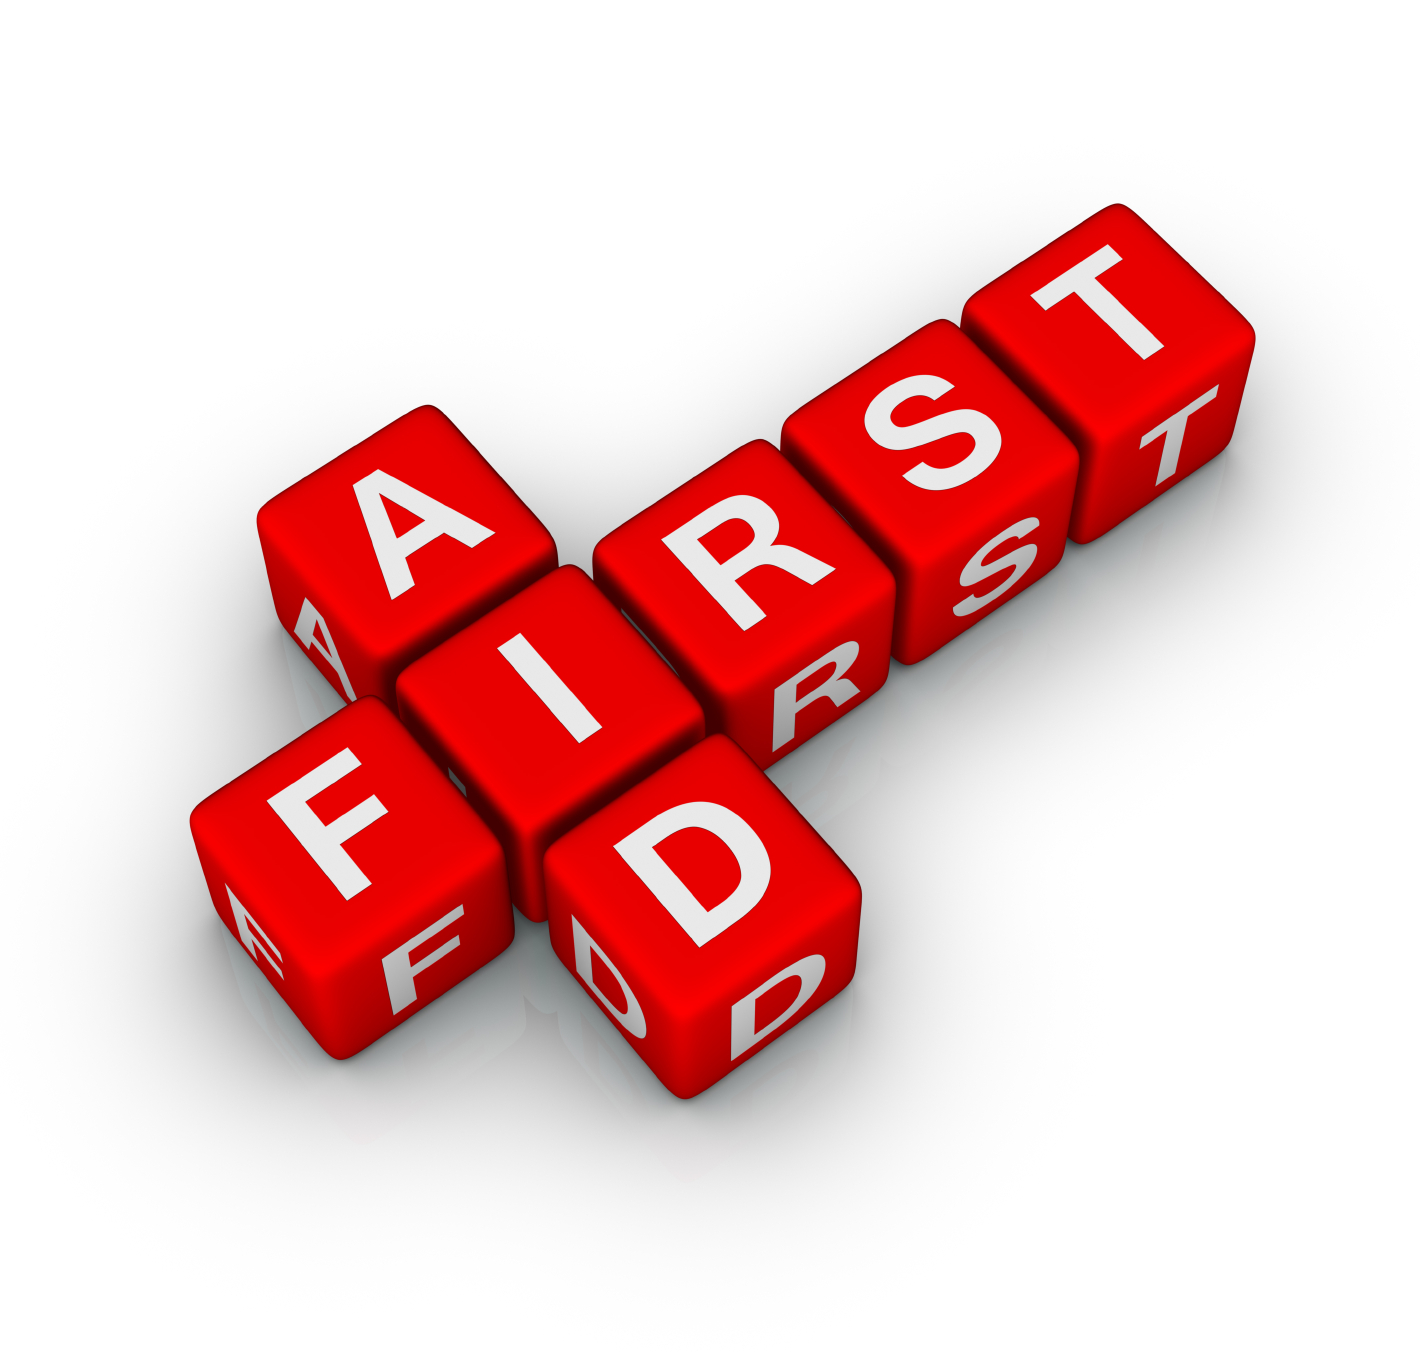 first-aid-basic-rules-signs-first-aid-action-safety-signs-ireland